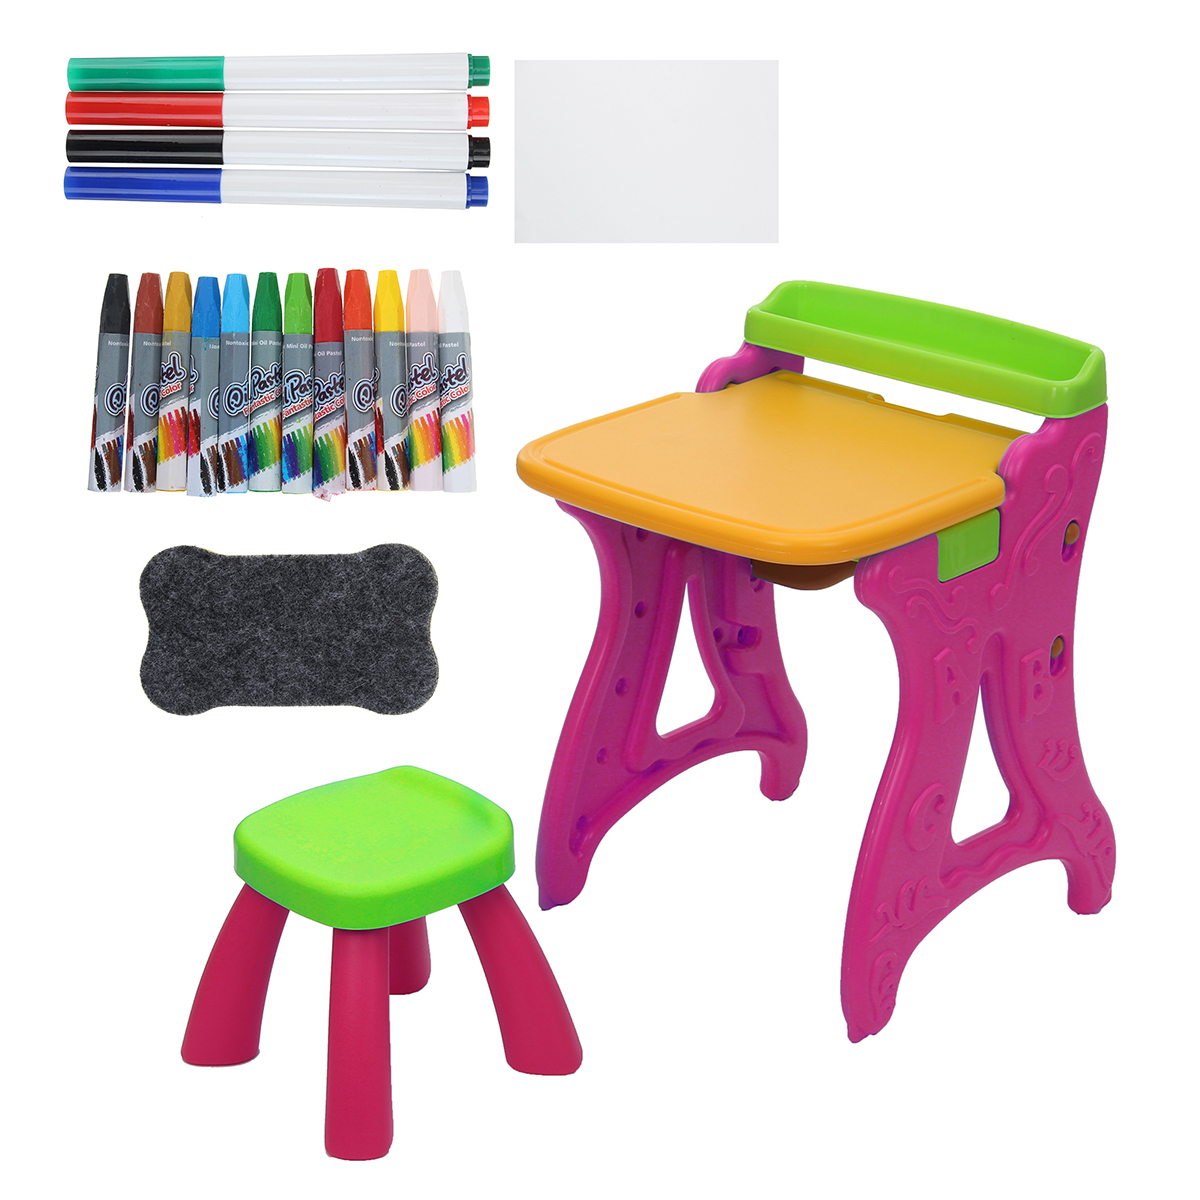 2-in-1-Folding-Drawing-Board-Table-Set-with-a-Kid-Sized-Stool-Plastic-Magnetic-Writing-White-Board-I-1853465-11